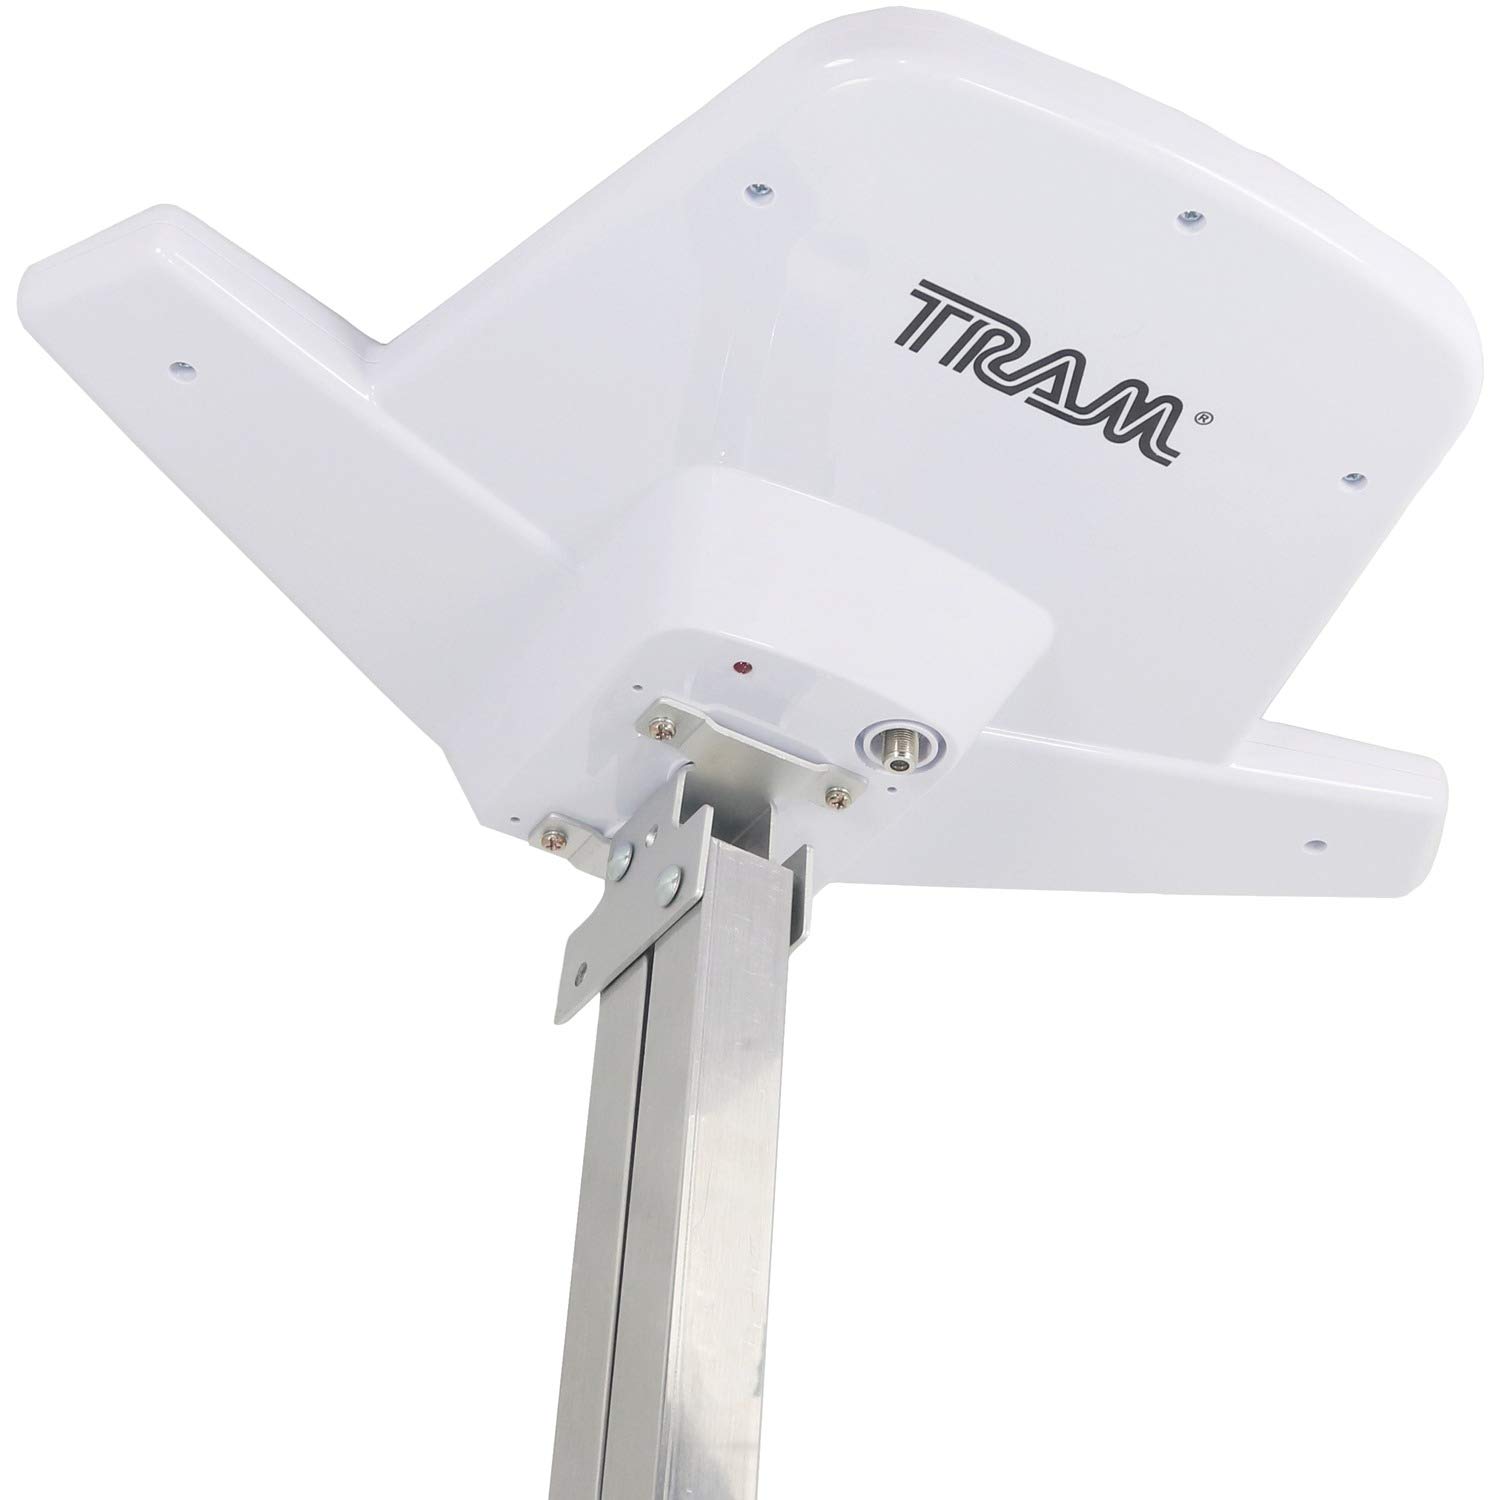 Tram HDTV Digital HDTV Amplified Outdoor Antenna for Home or RV Head Replacement,bat-Wing-Style retrofit